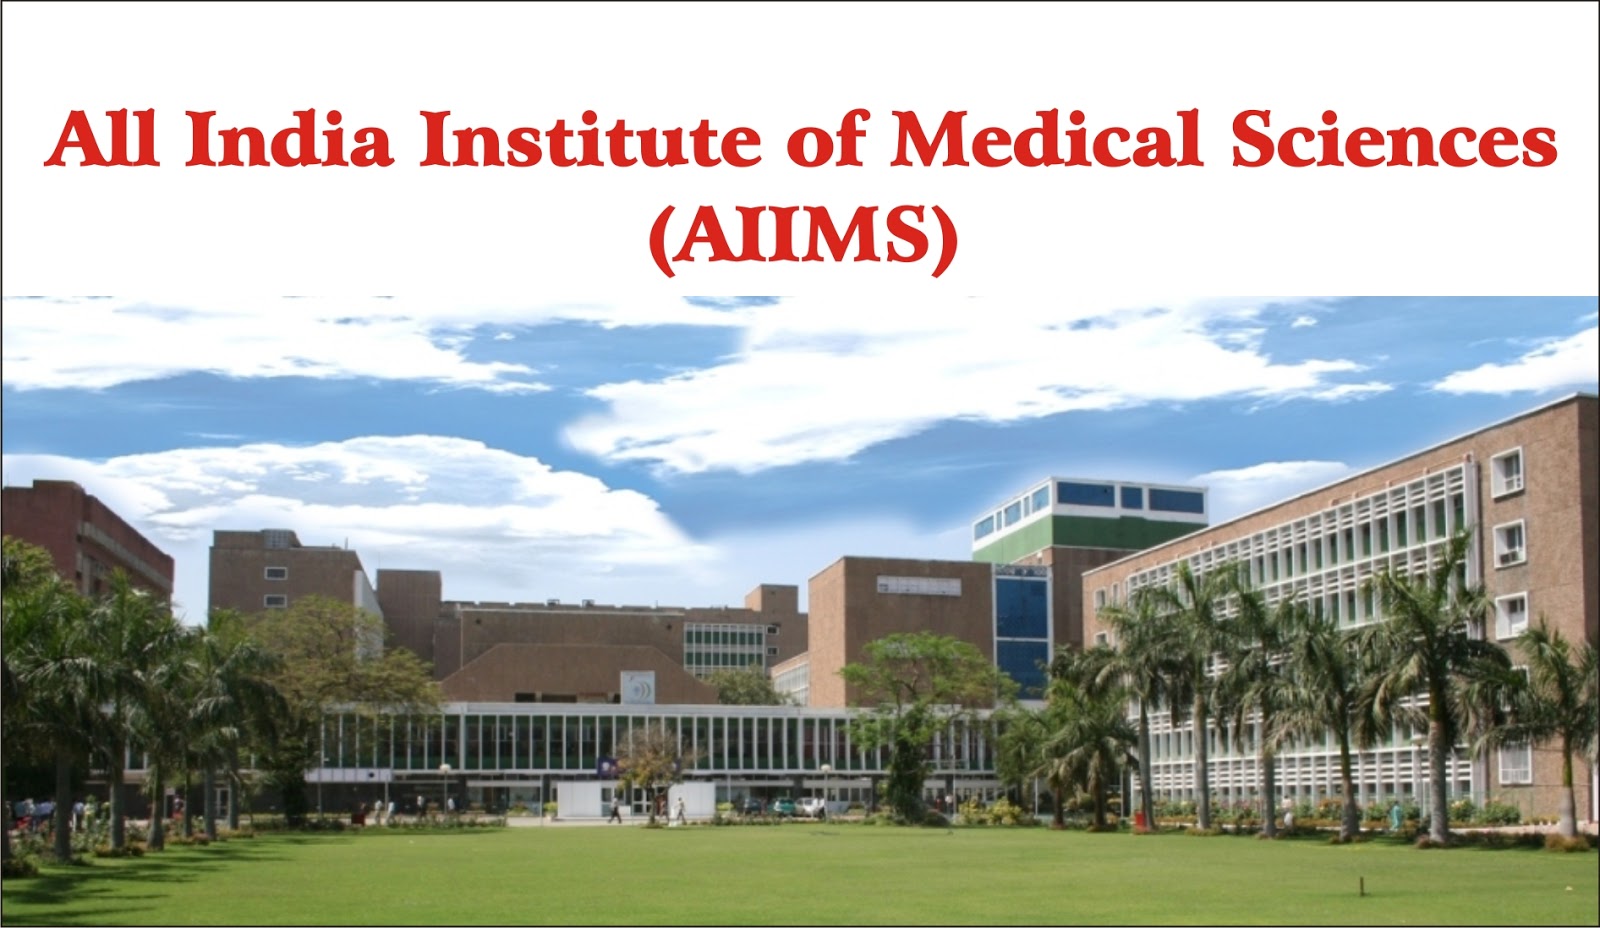 AIIMS LDC Result 2016 To Be Announced soon at www.aiimsexams.org for the Posts of Lower Division Clerk